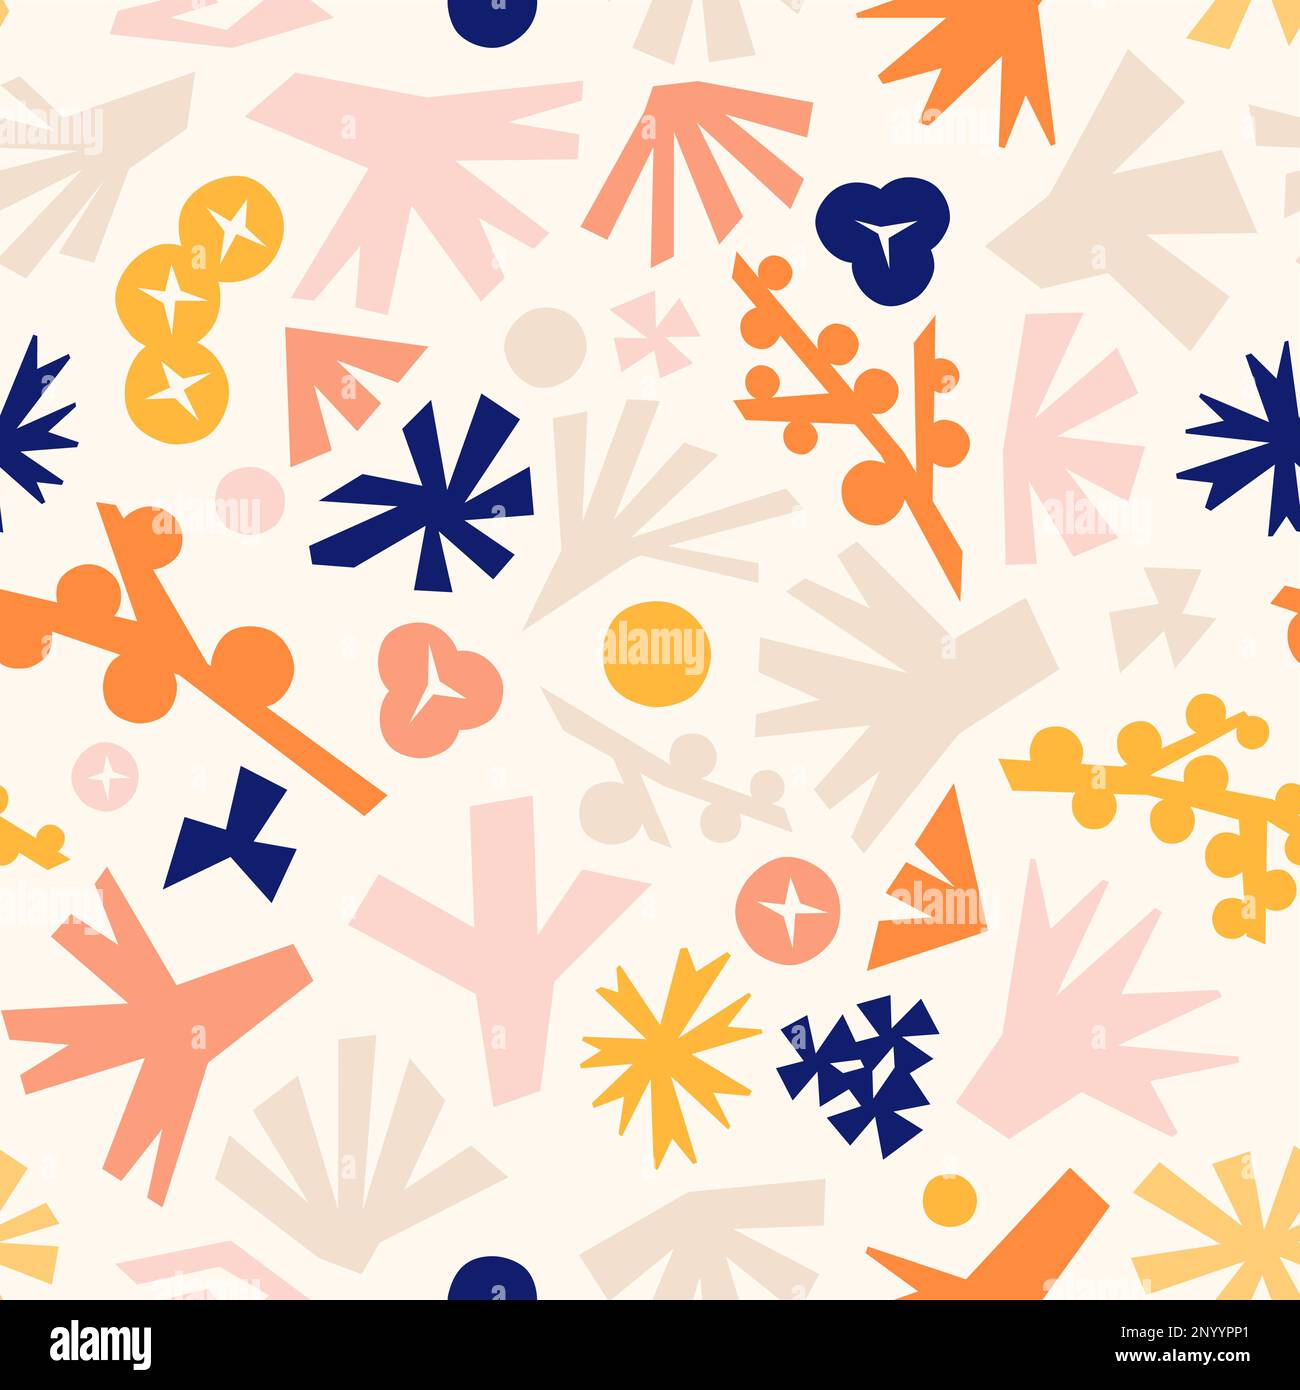 Vector Pastel Pink, Beige, Blue and Orange Botanic Abstract Blossoms and Garden Elements Seamless Pattern. Stock Vector